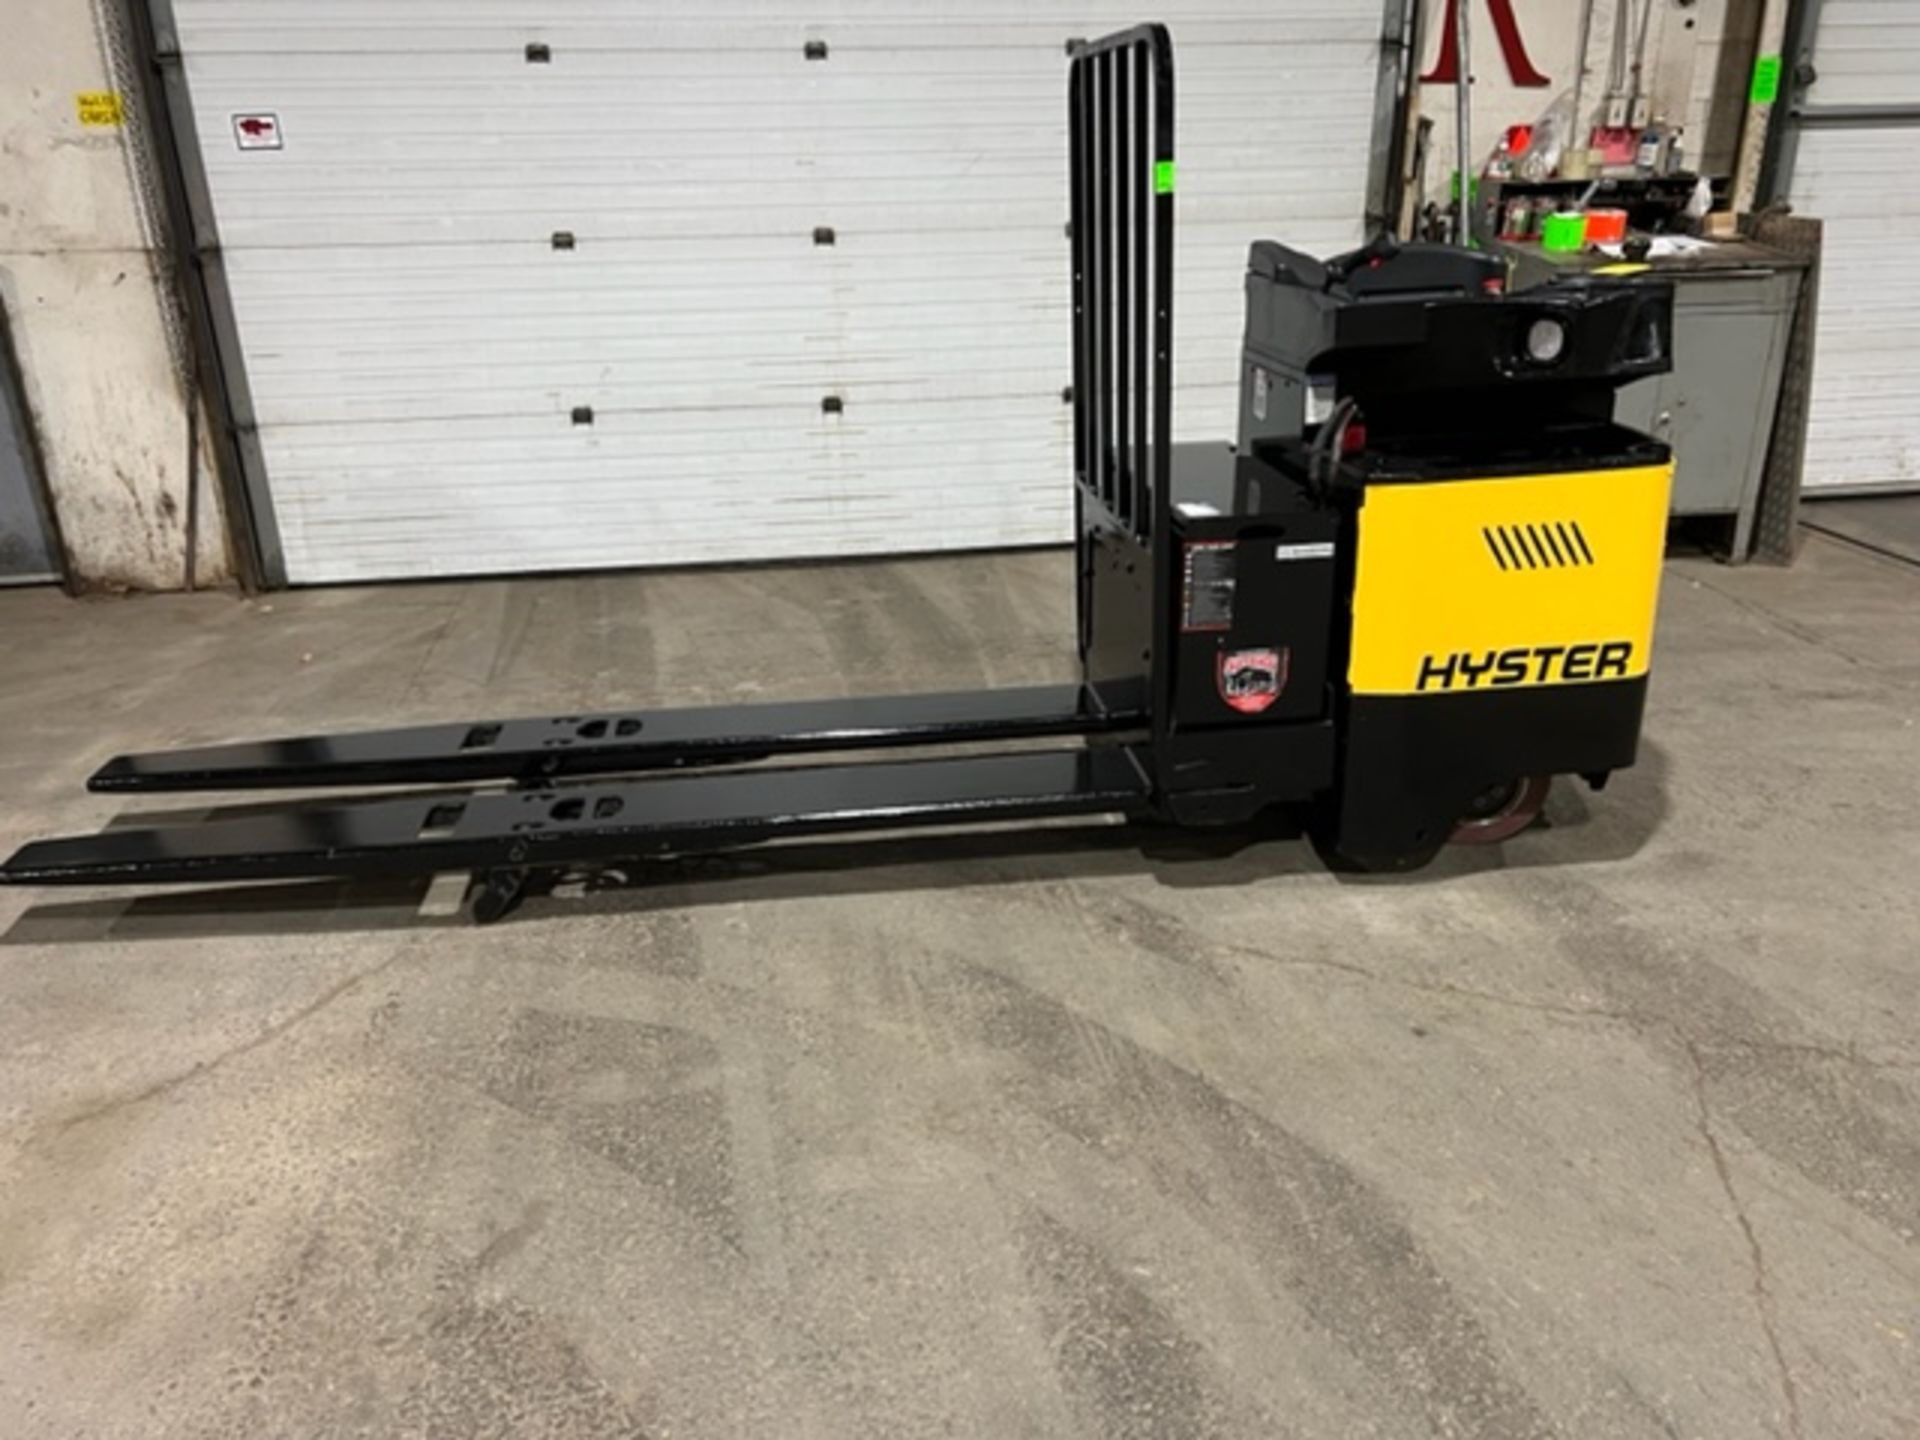 NICE 2015 Hyster Ride-On END RIDER Powered Pallet Truck 8' Long Forks 8000lbs capacity with LOW